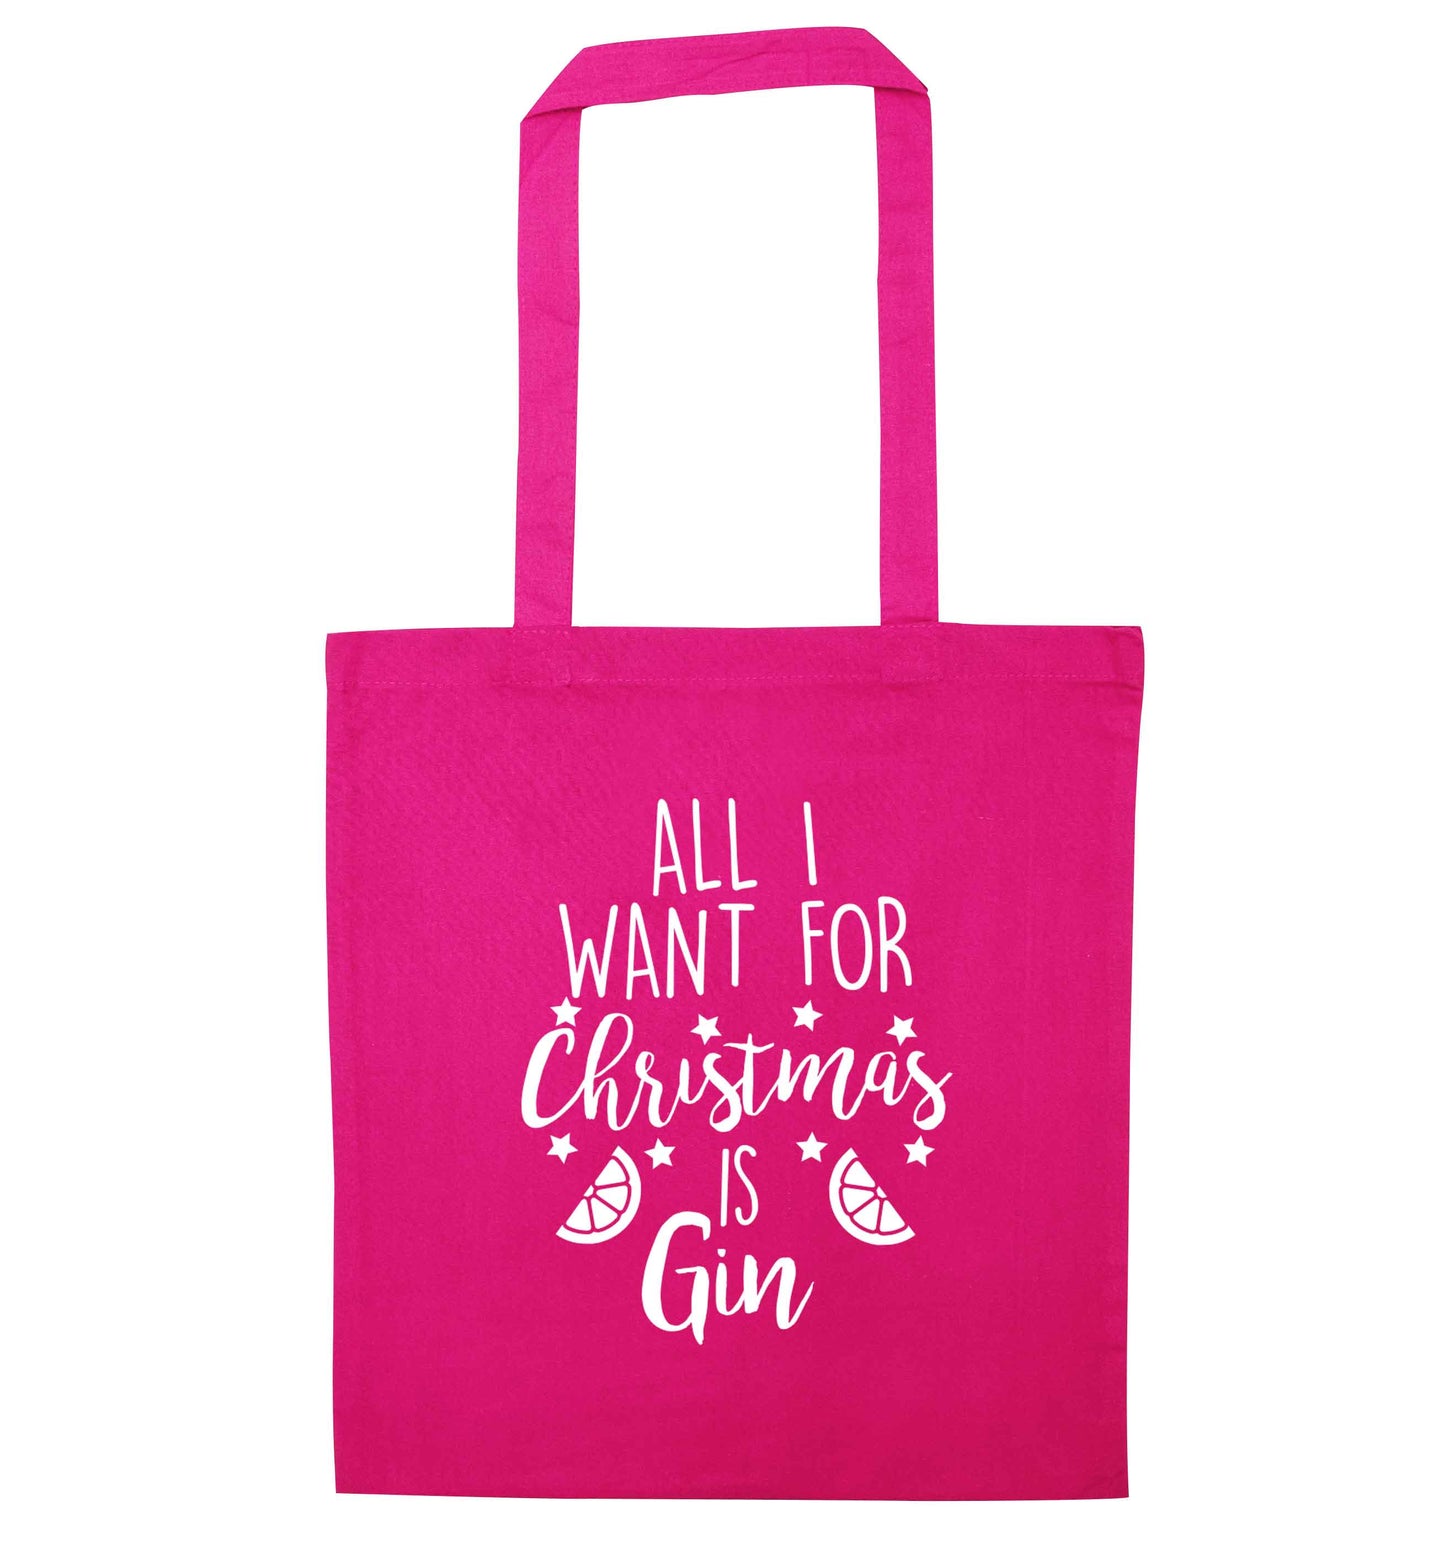 All I want for Christmas is gin pink tote bag